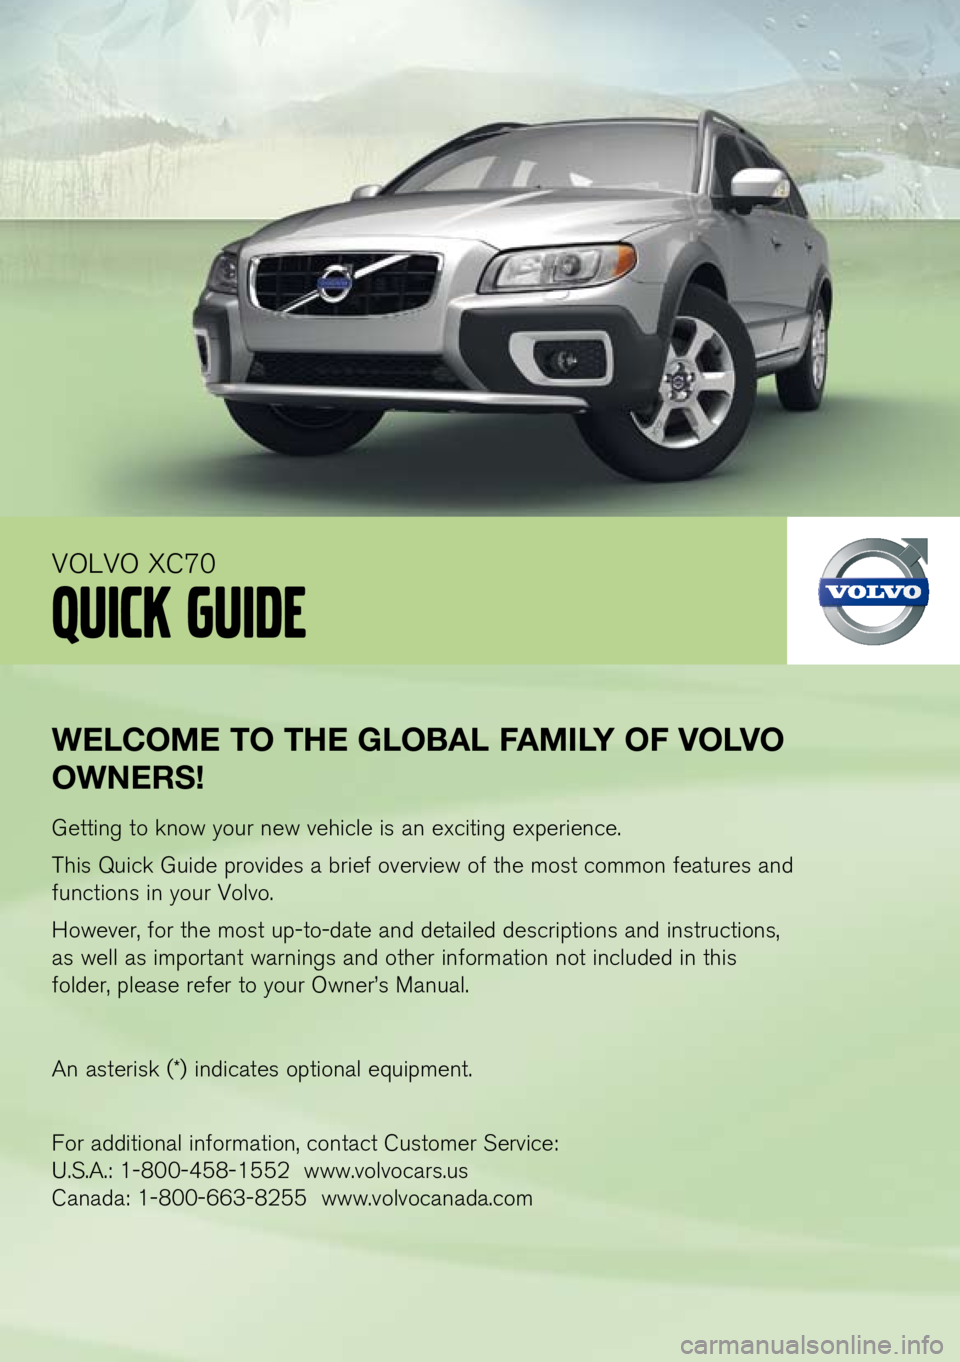 VOLVO XC70 2011  Quick Guide 
WElCOME TO THE  glOB al  faMIlY O f vO lv O 
OW nER s!
Getting to know your new vehicle is an exciting experience.
This Quick Guide provides a brief overview of the most common features and 
function